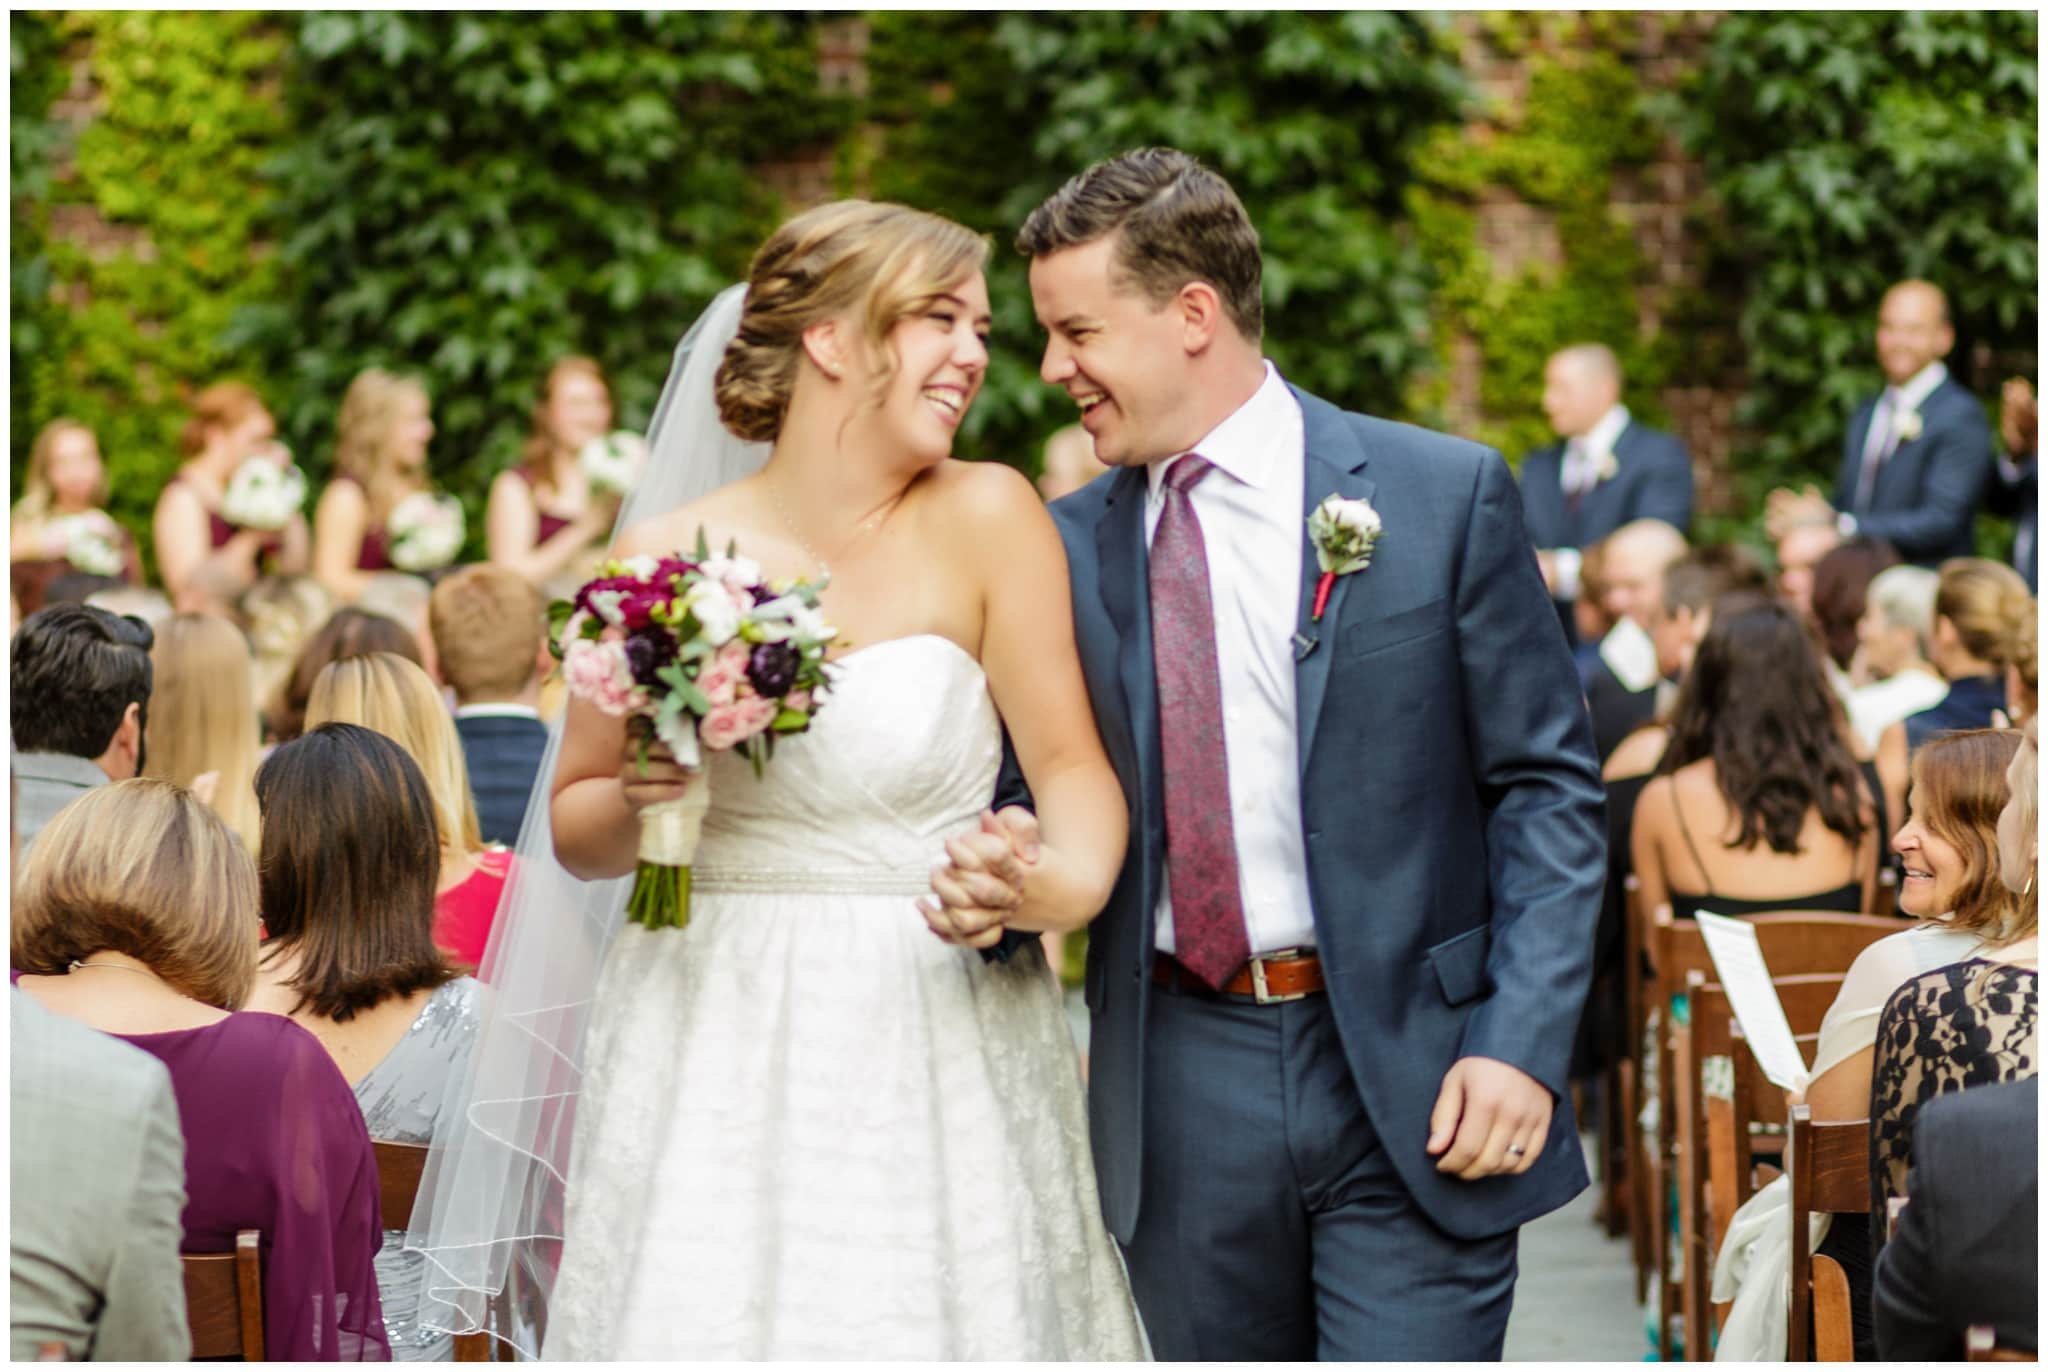 College of Physicians Wedding | Jessica and Andy bounded down the aisle together when they took their first steps as husband and wife.